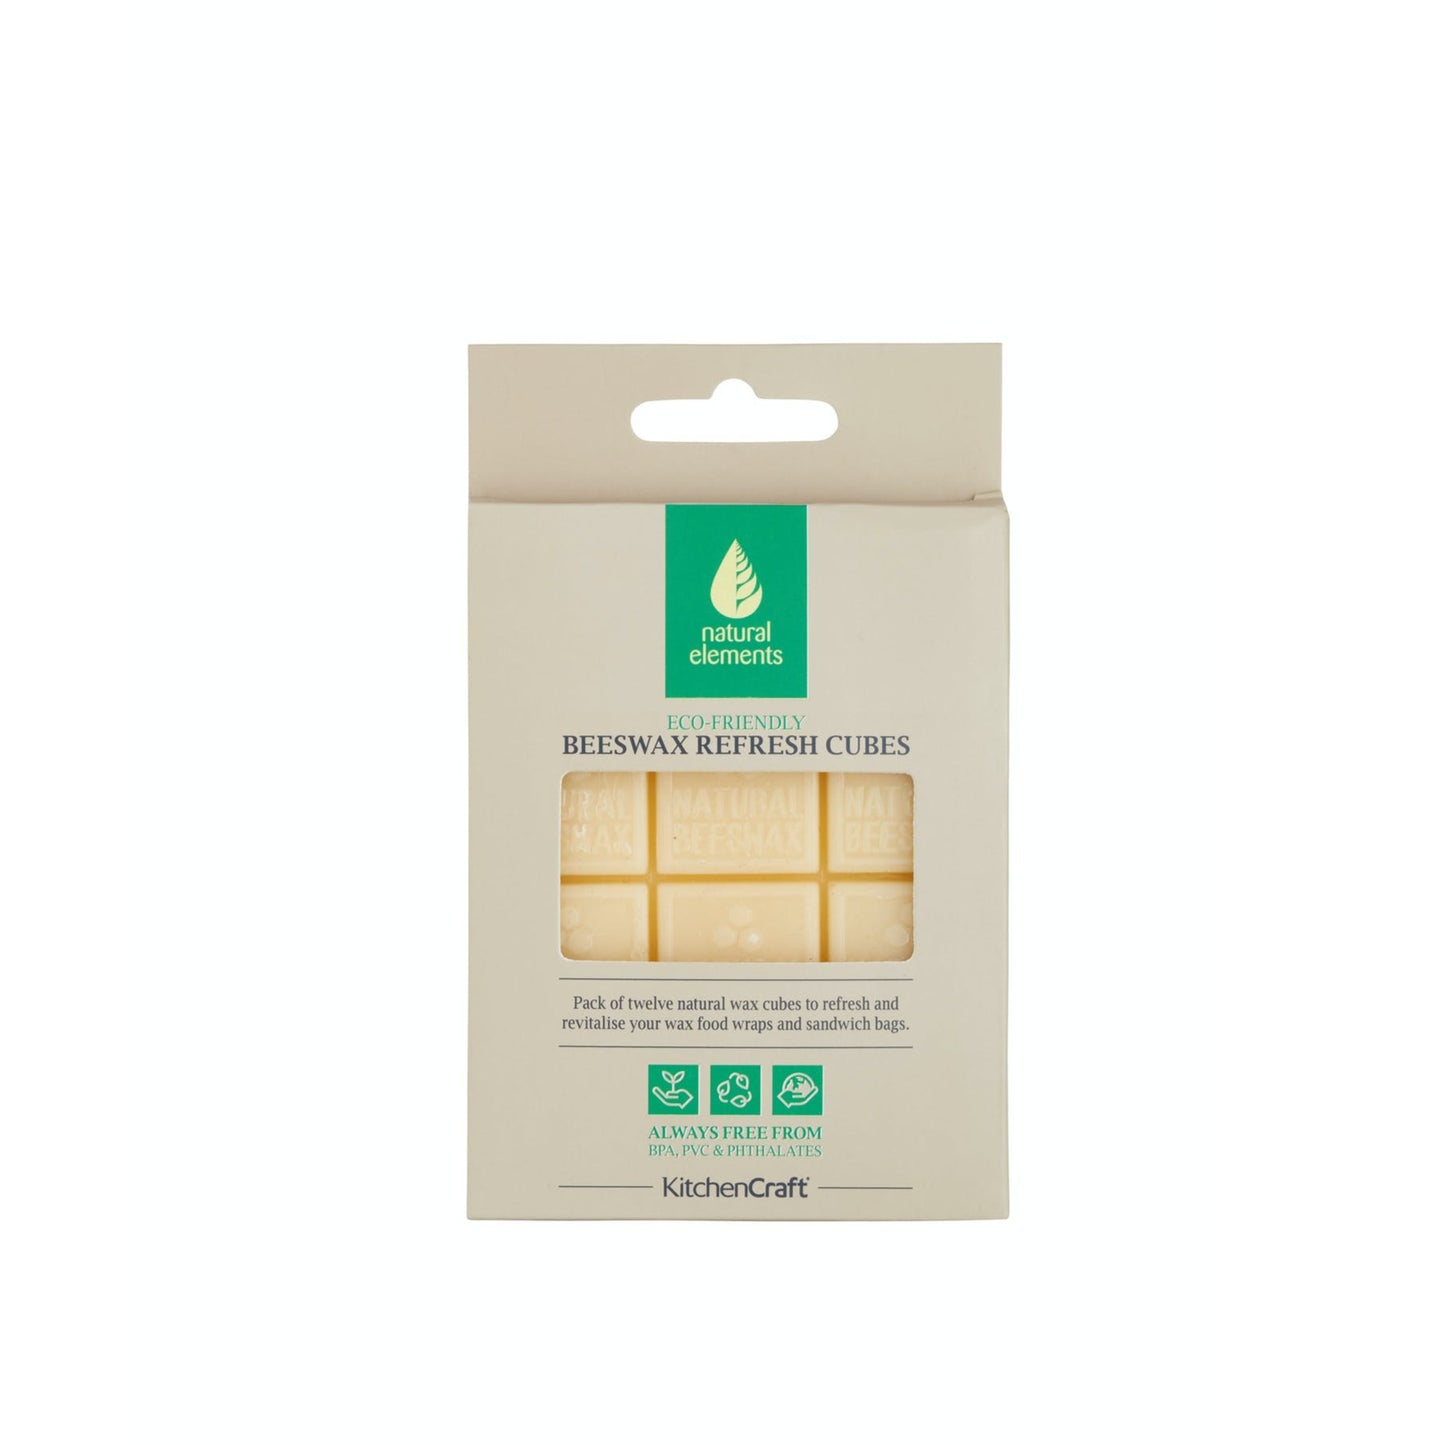 Beeswax Refresh Cubes